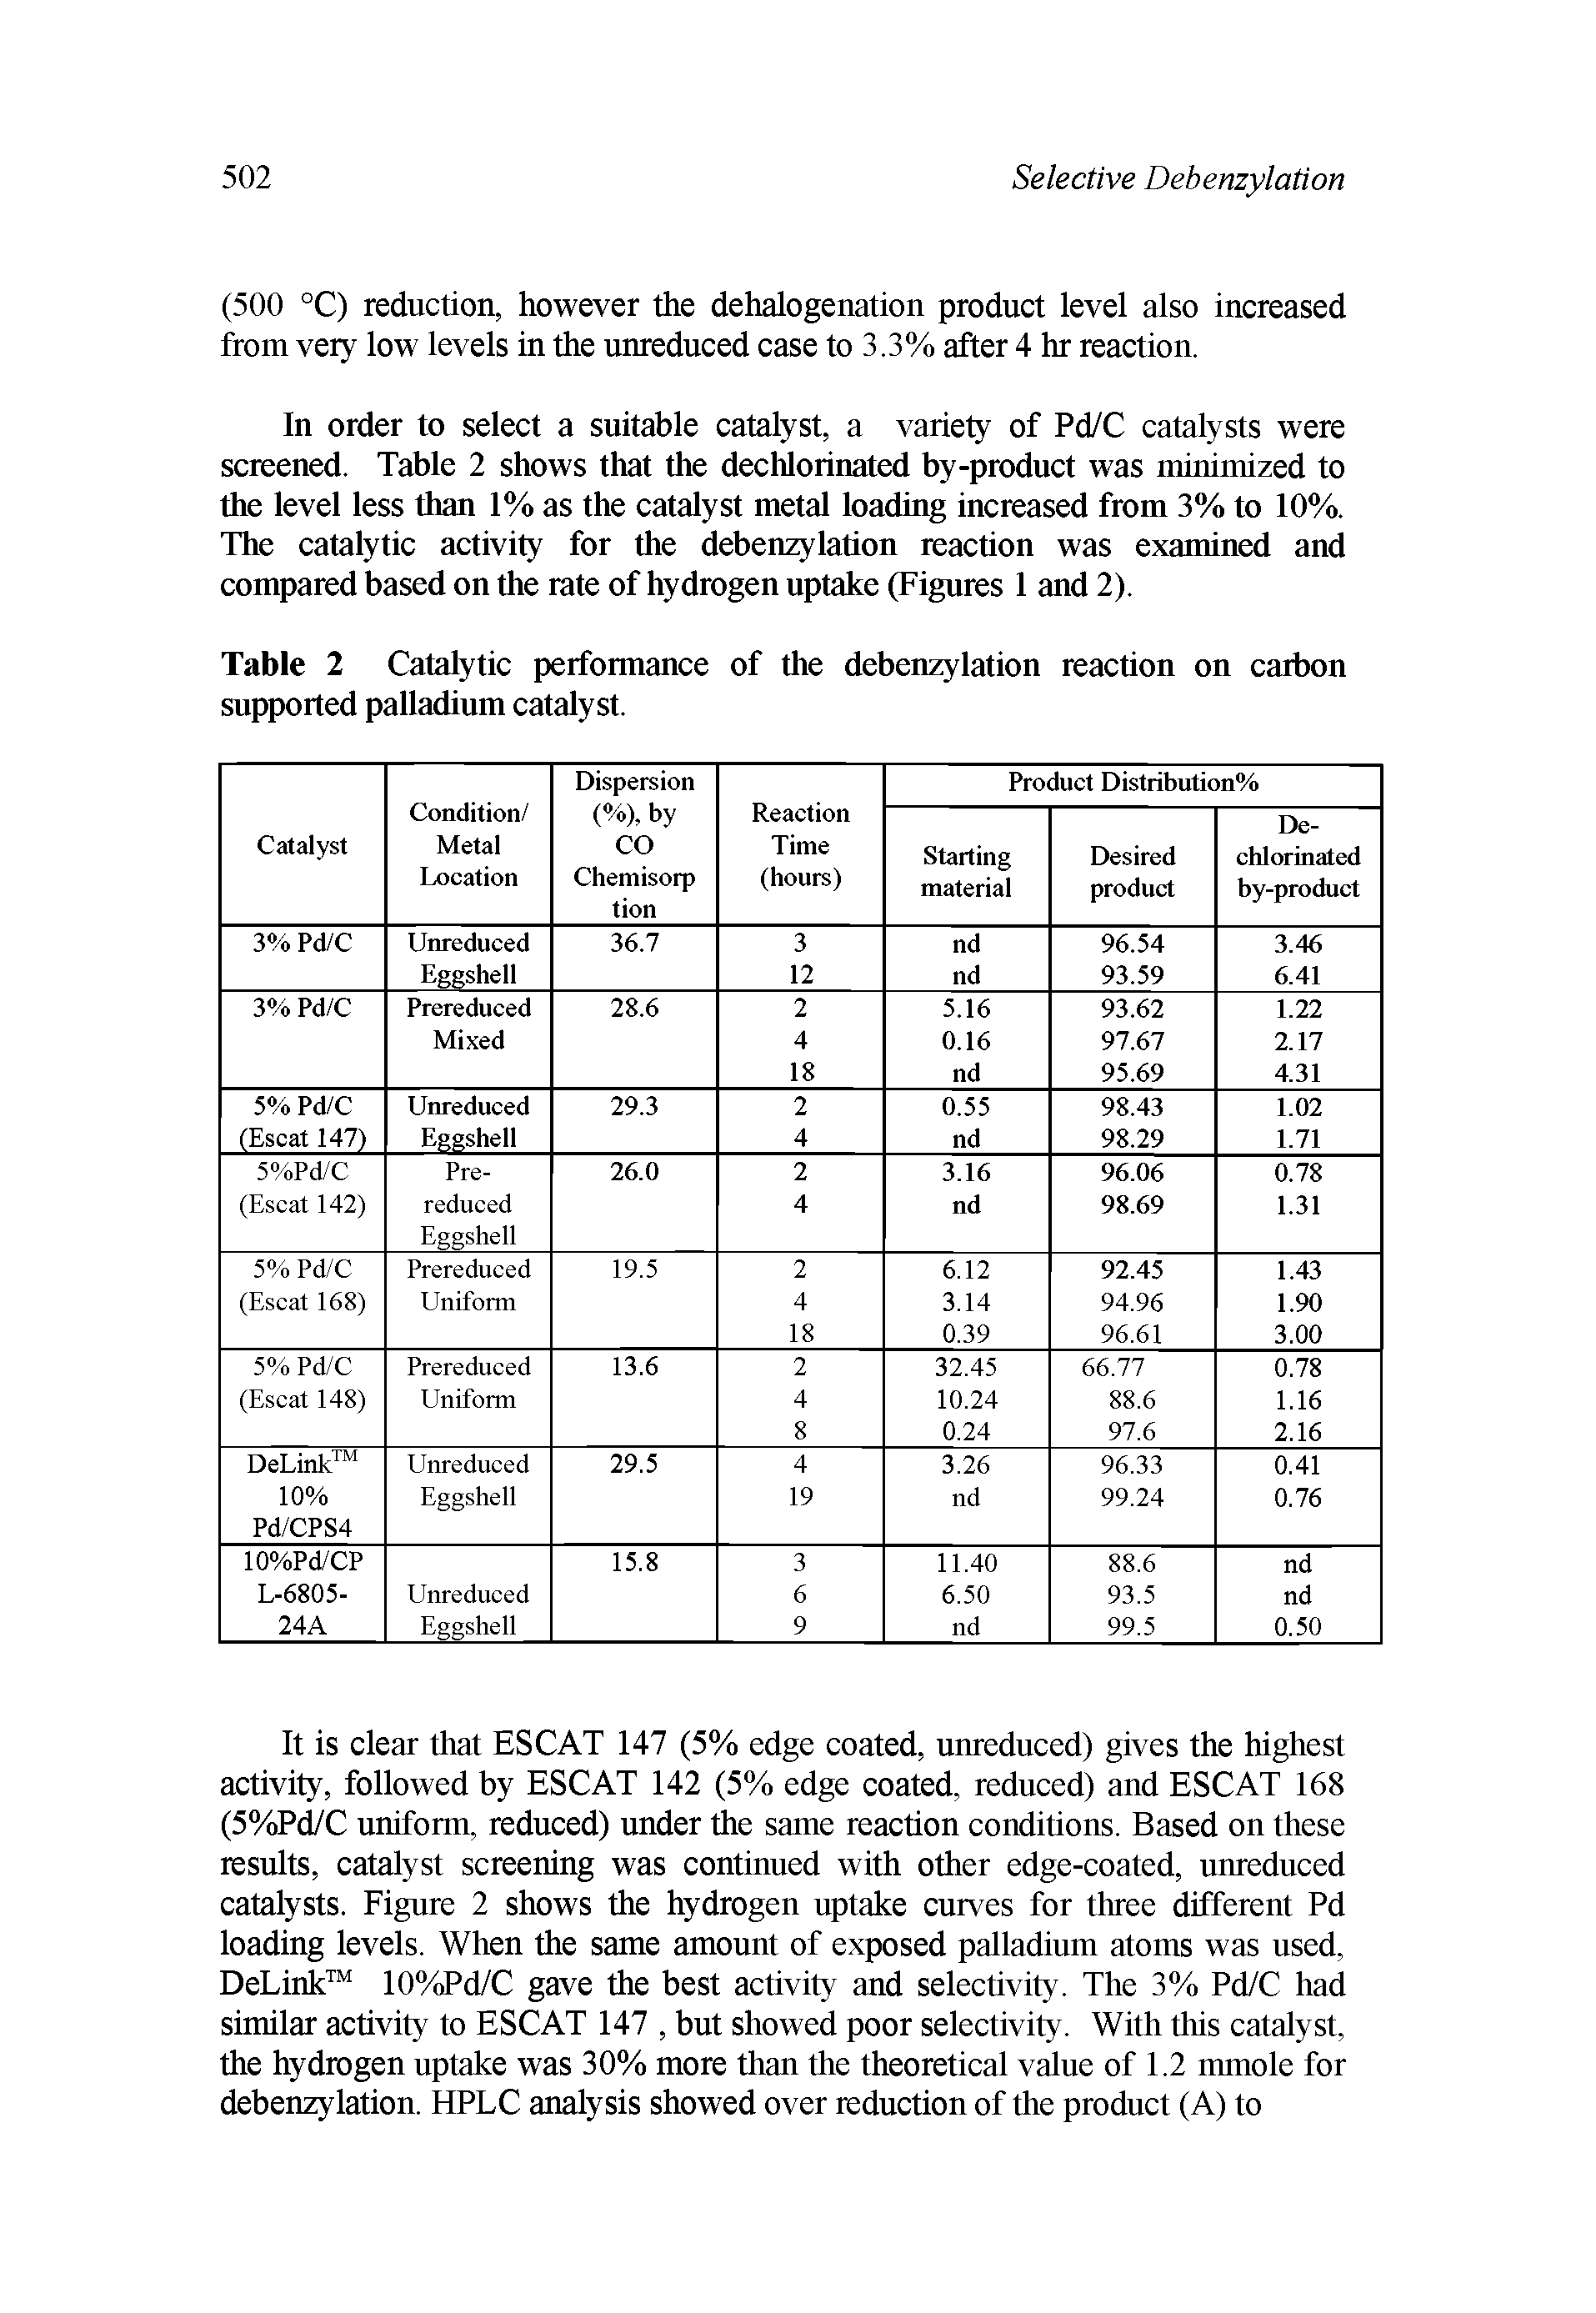 Table 2 Catalytic performance of the debenzylation reaction on carbon supported palladium catalyst.